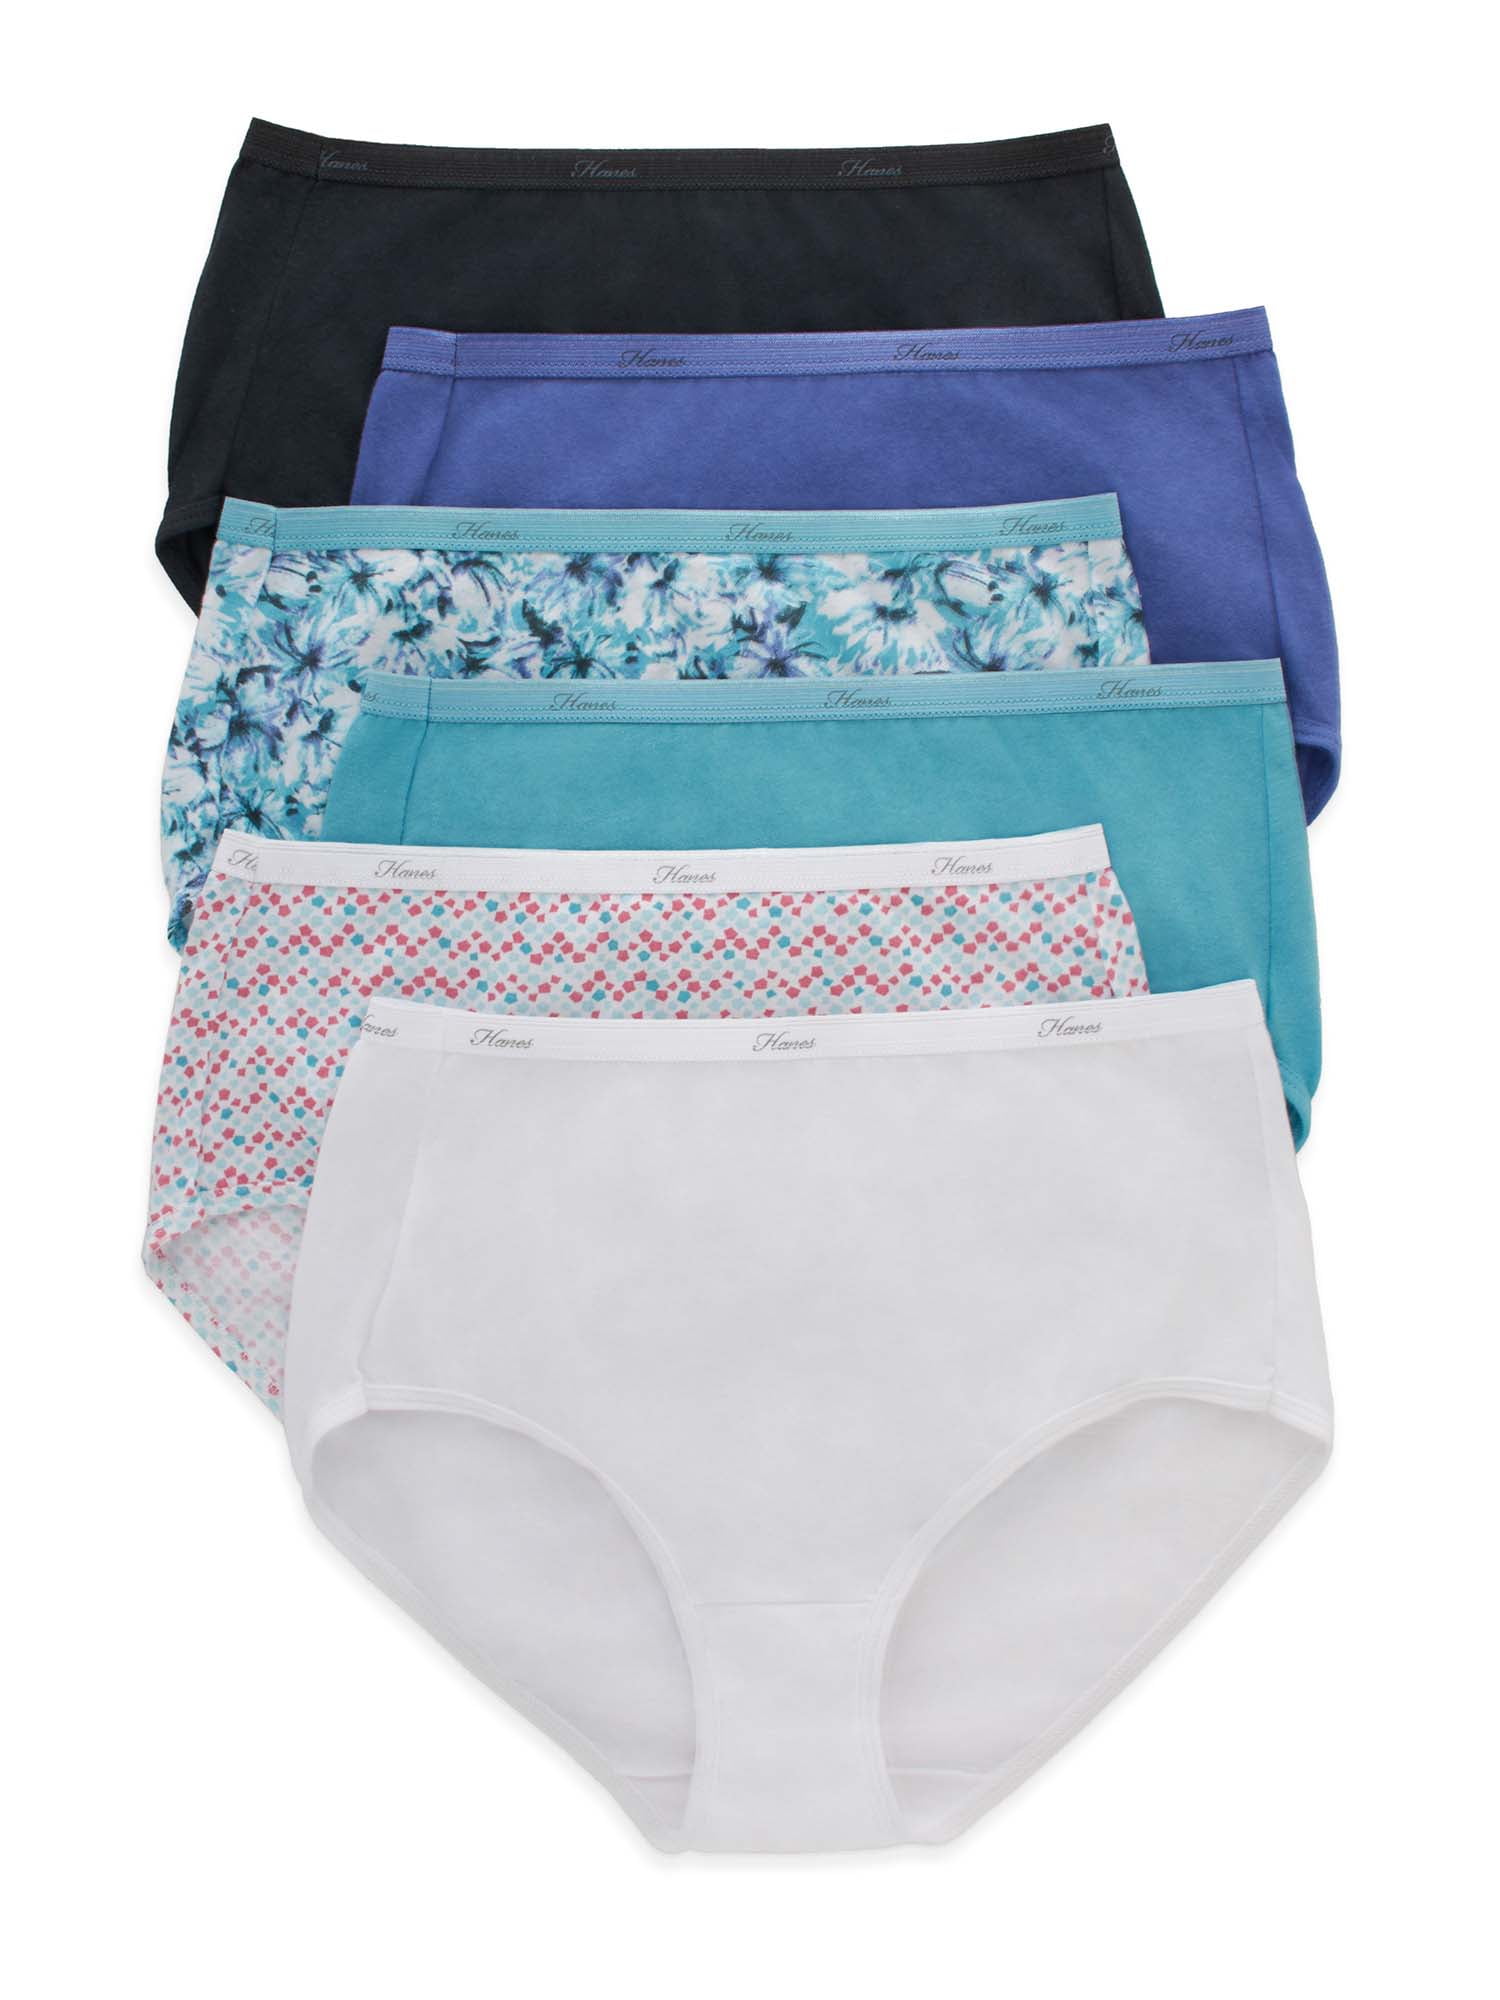 Hanes Women's Ultimate Cotton Comfort Briefs Assorted Colors & Patterns  4-Pack